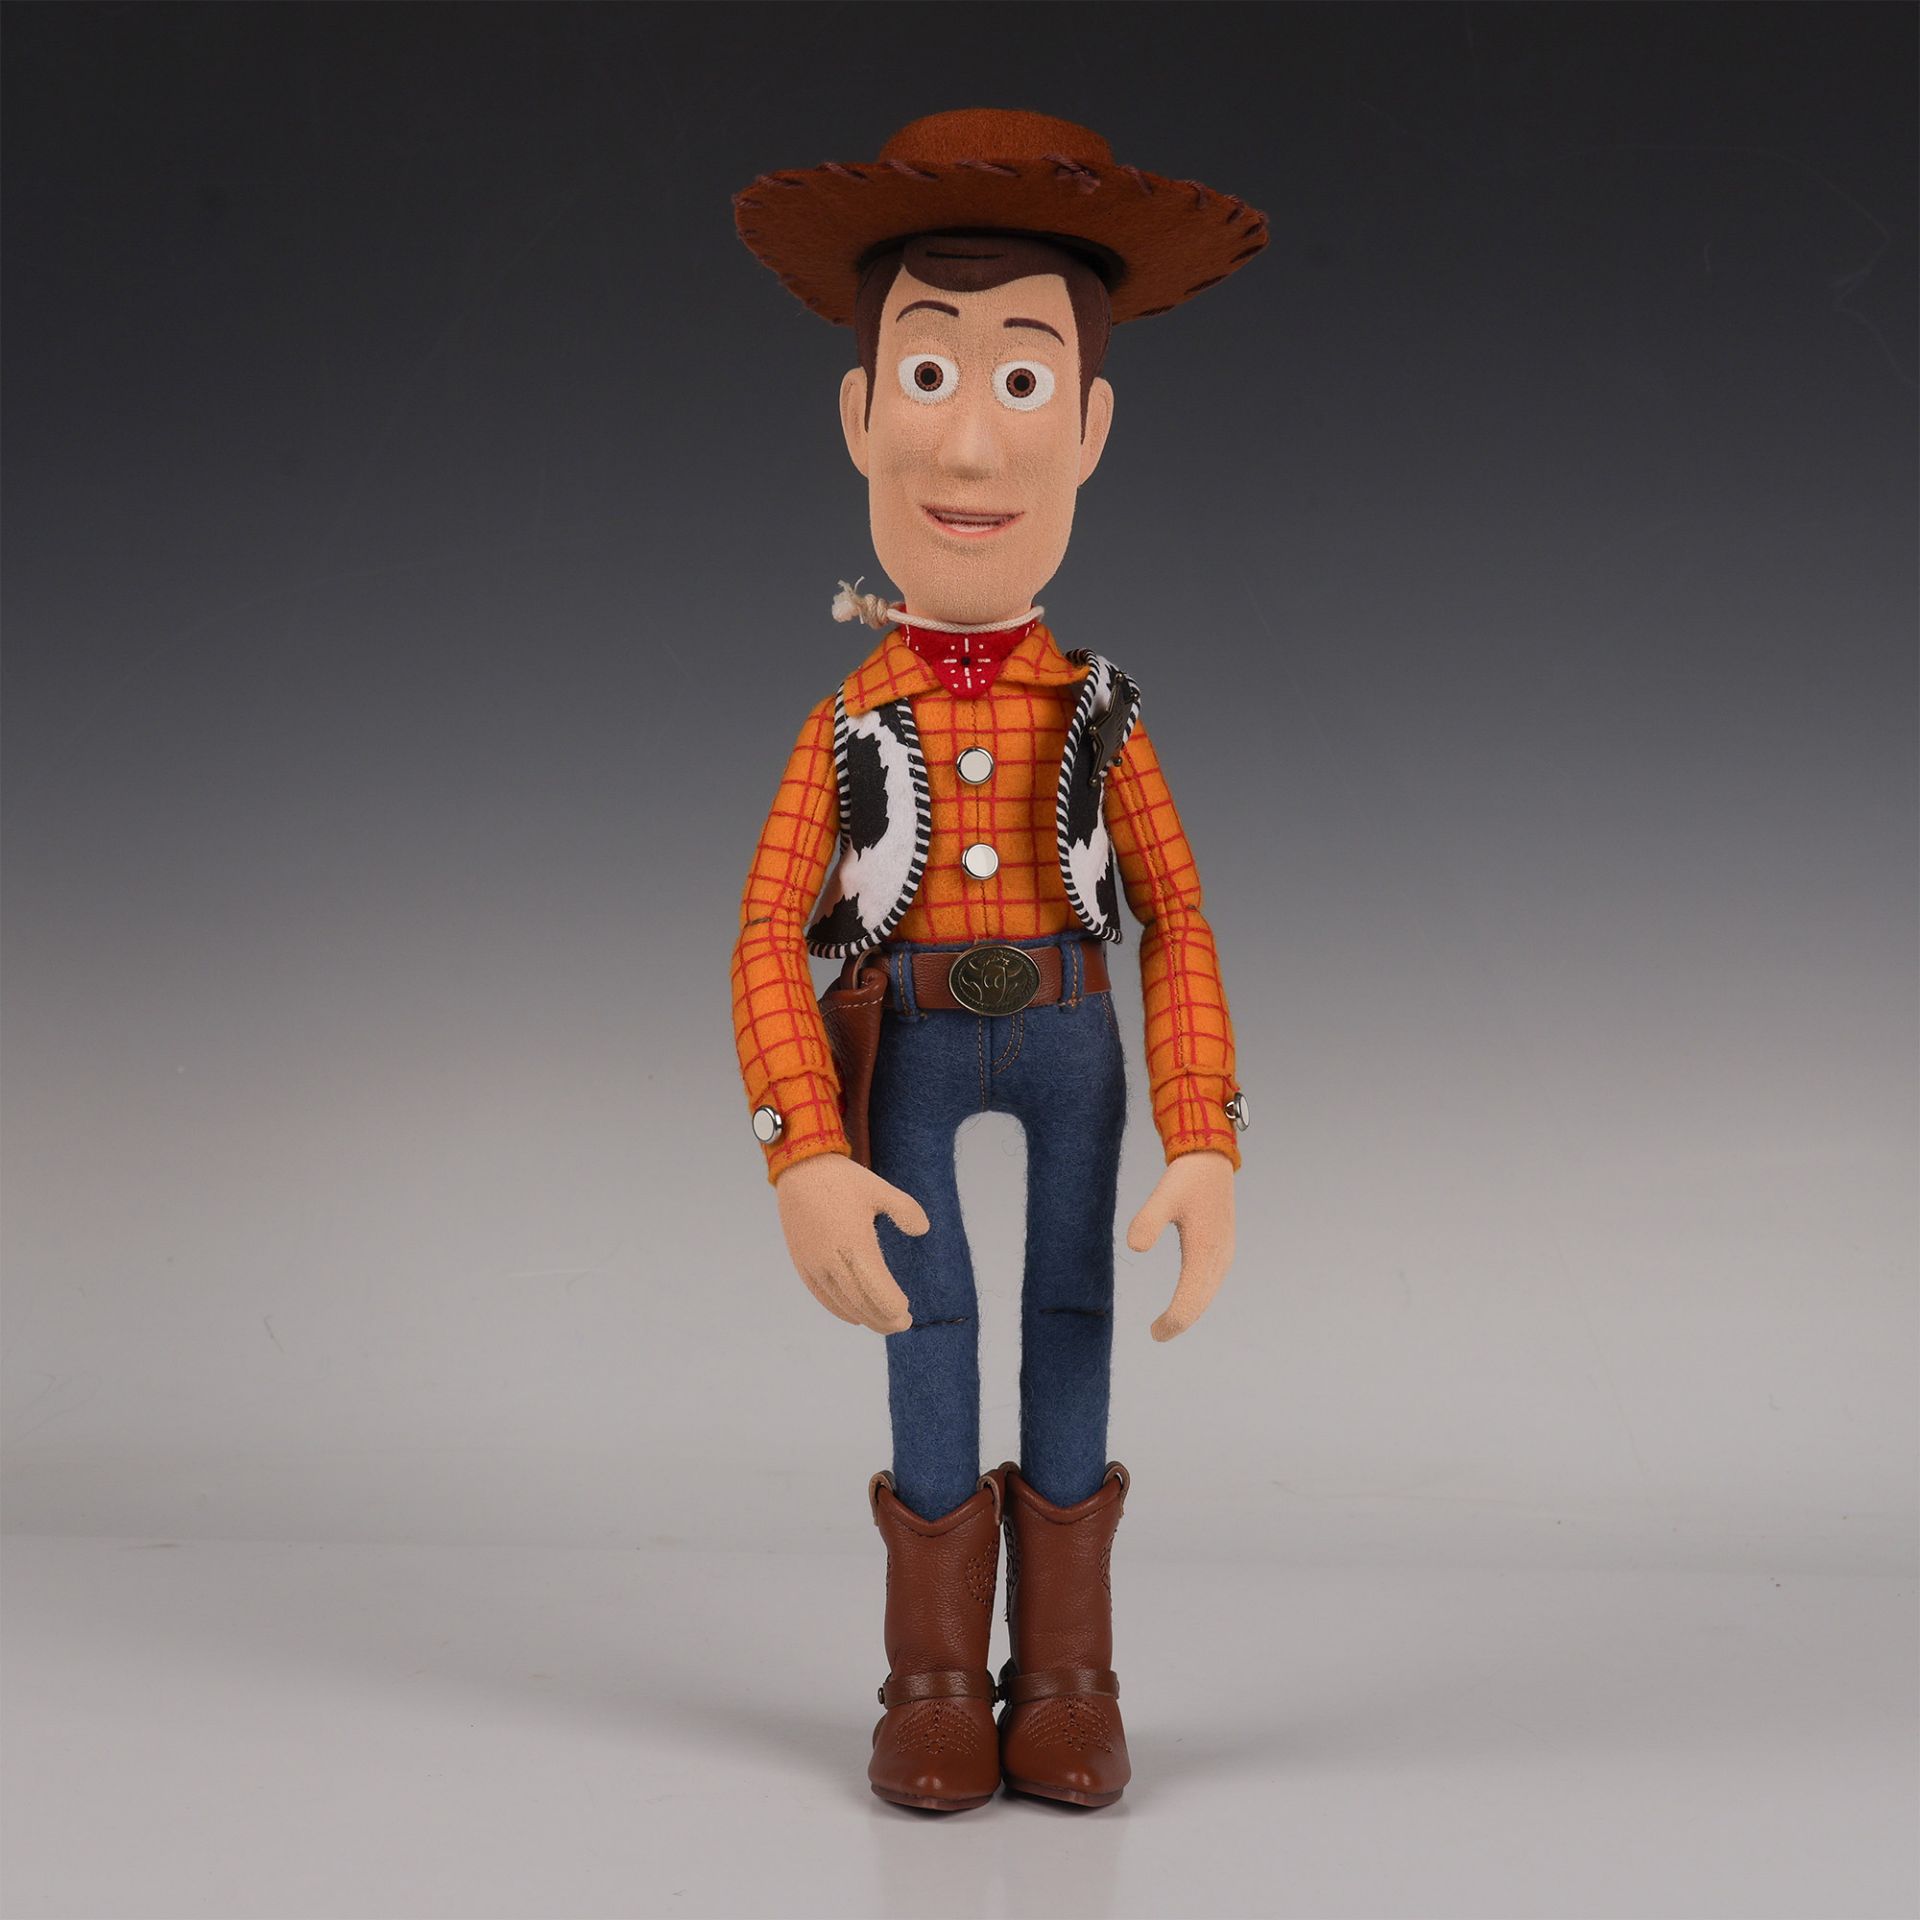 Steiff Character, Woody from Disney/Pixar's Toy Story - Image 5 of 12